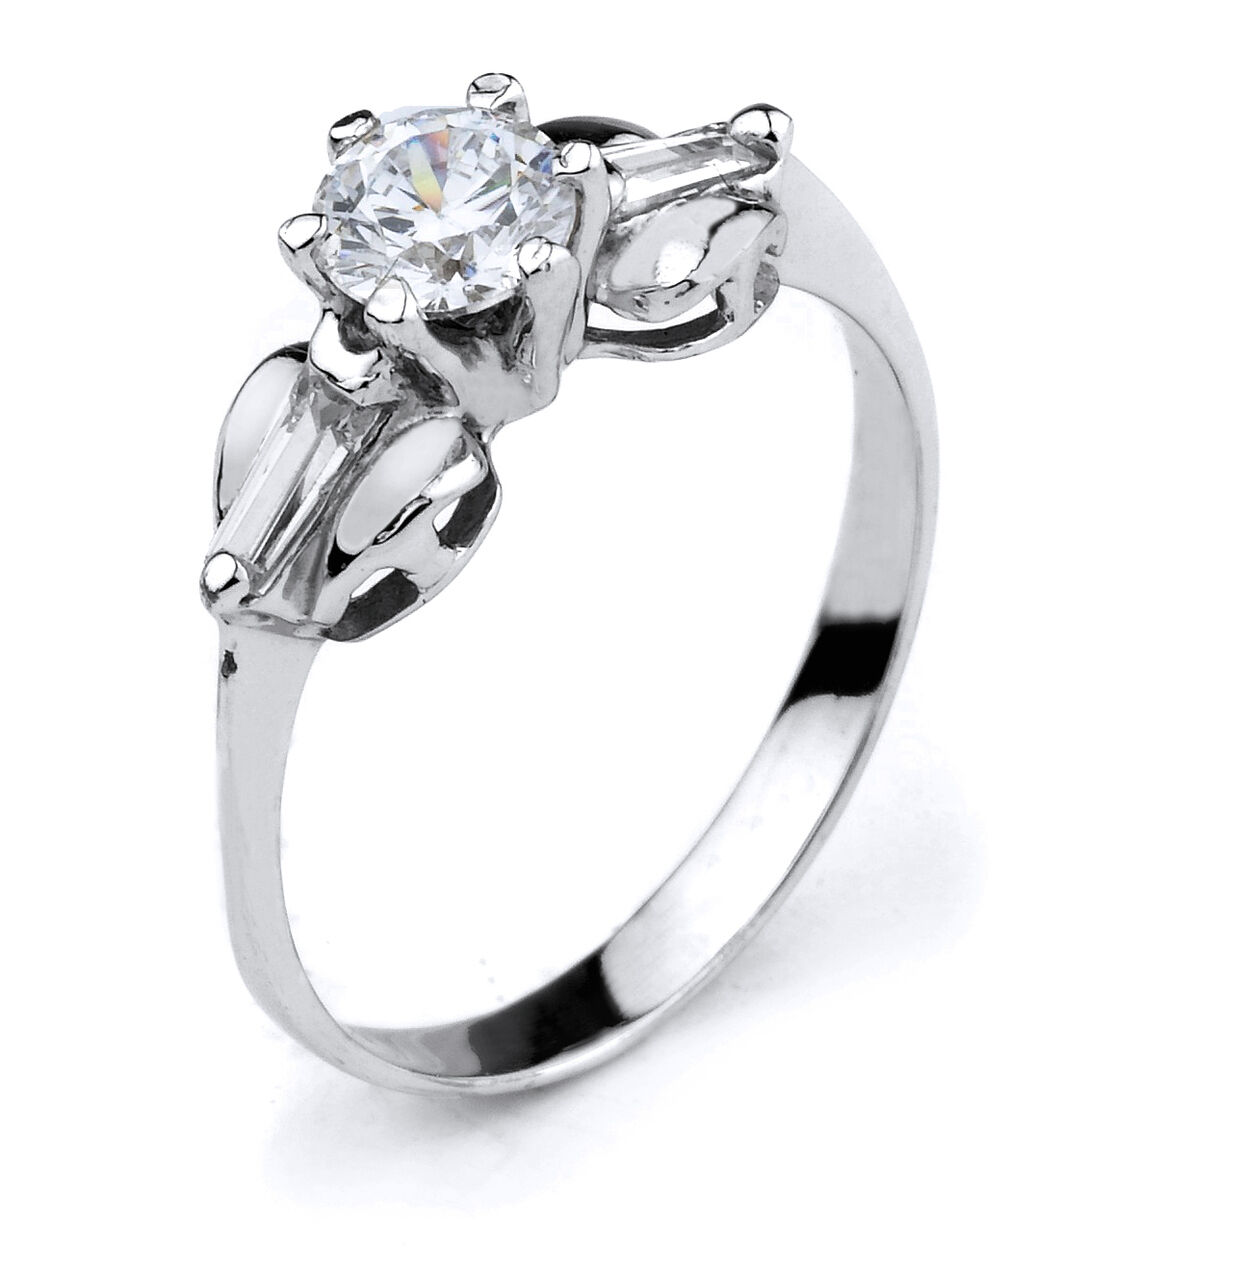 10k White Gold Engagement Wedding Ring with 3 Stone of Cubic 